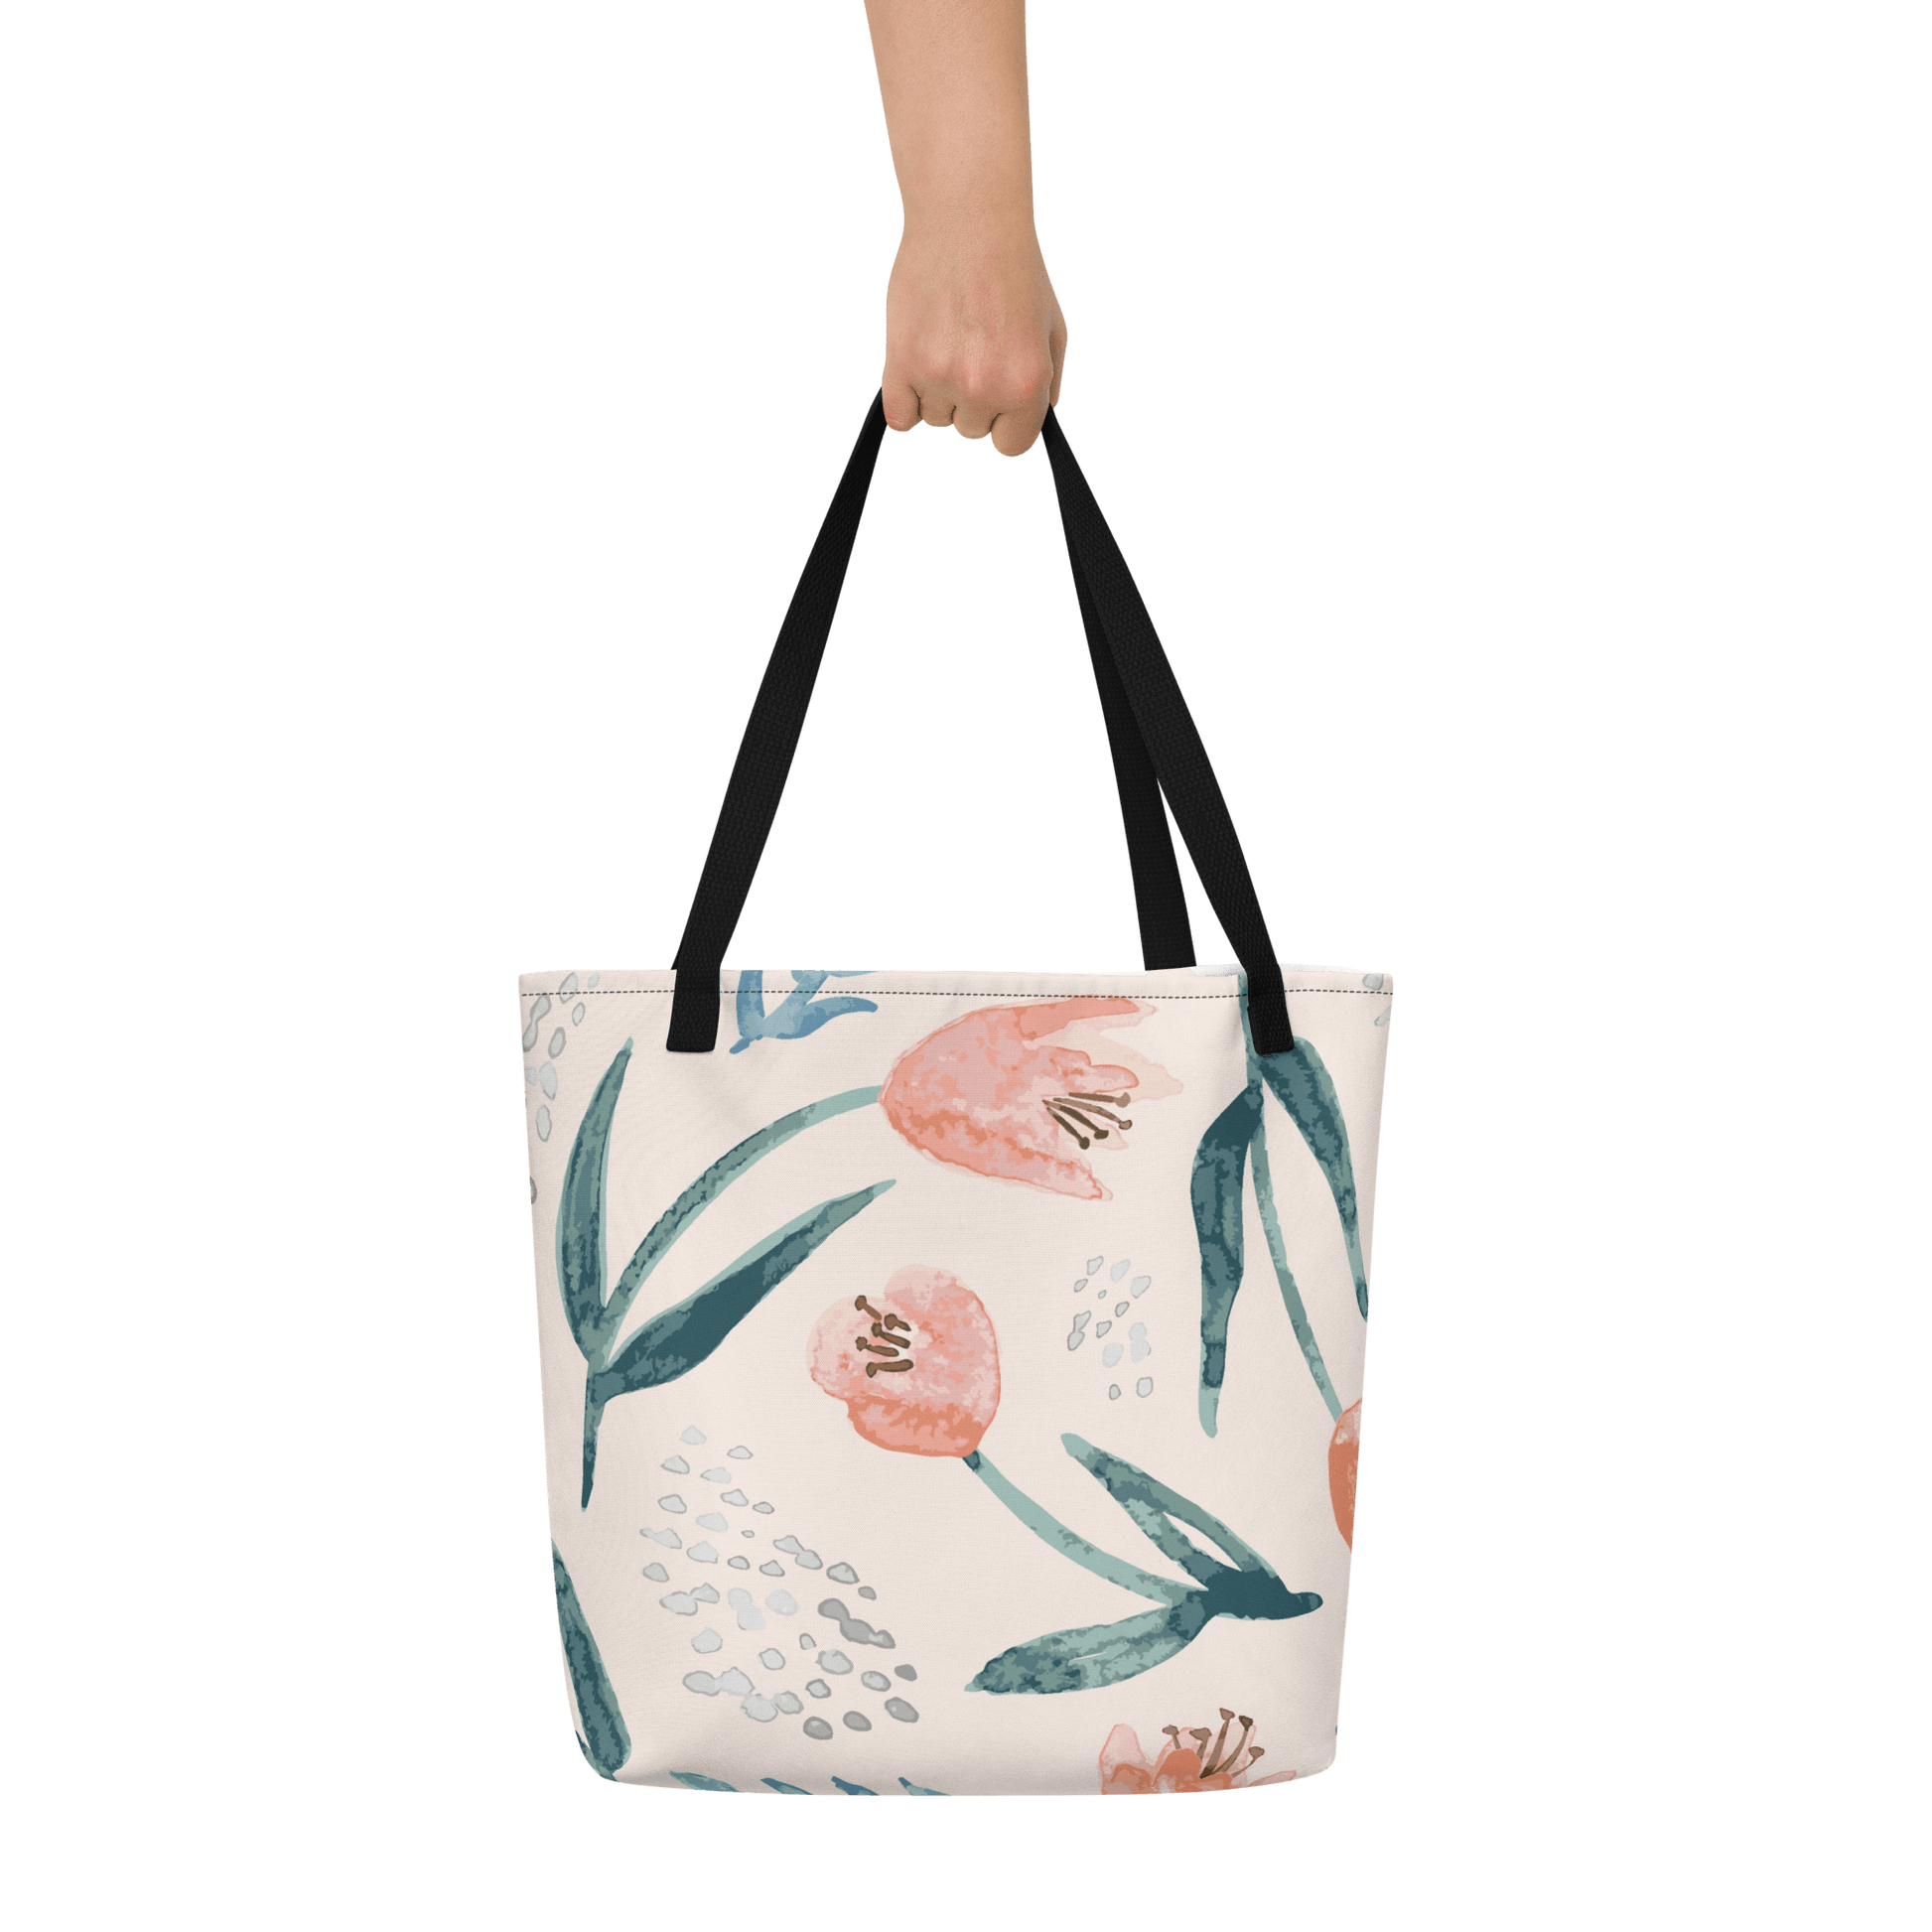 Usually Forget Large Tote Bag - L & M Kee, LLC